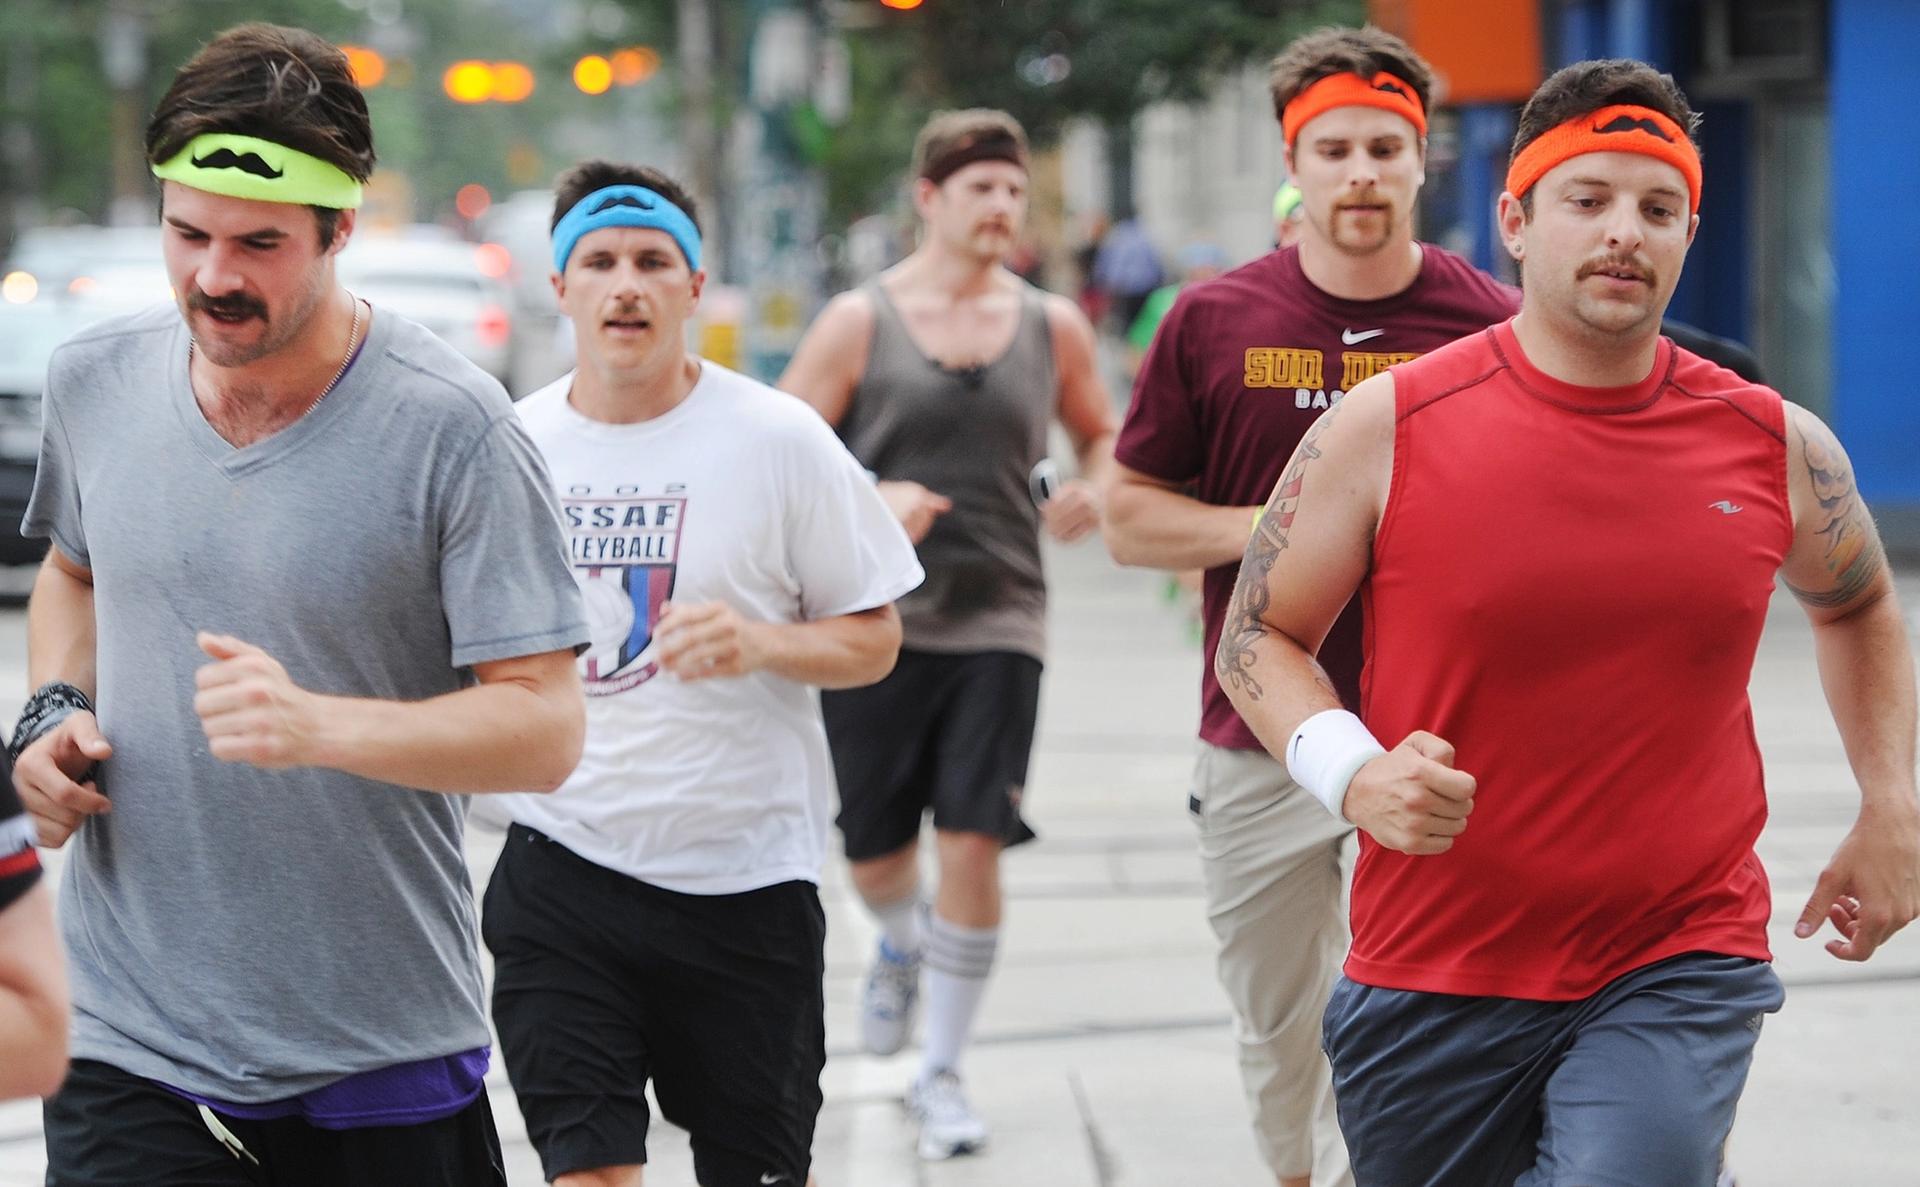 Men with moustaches running